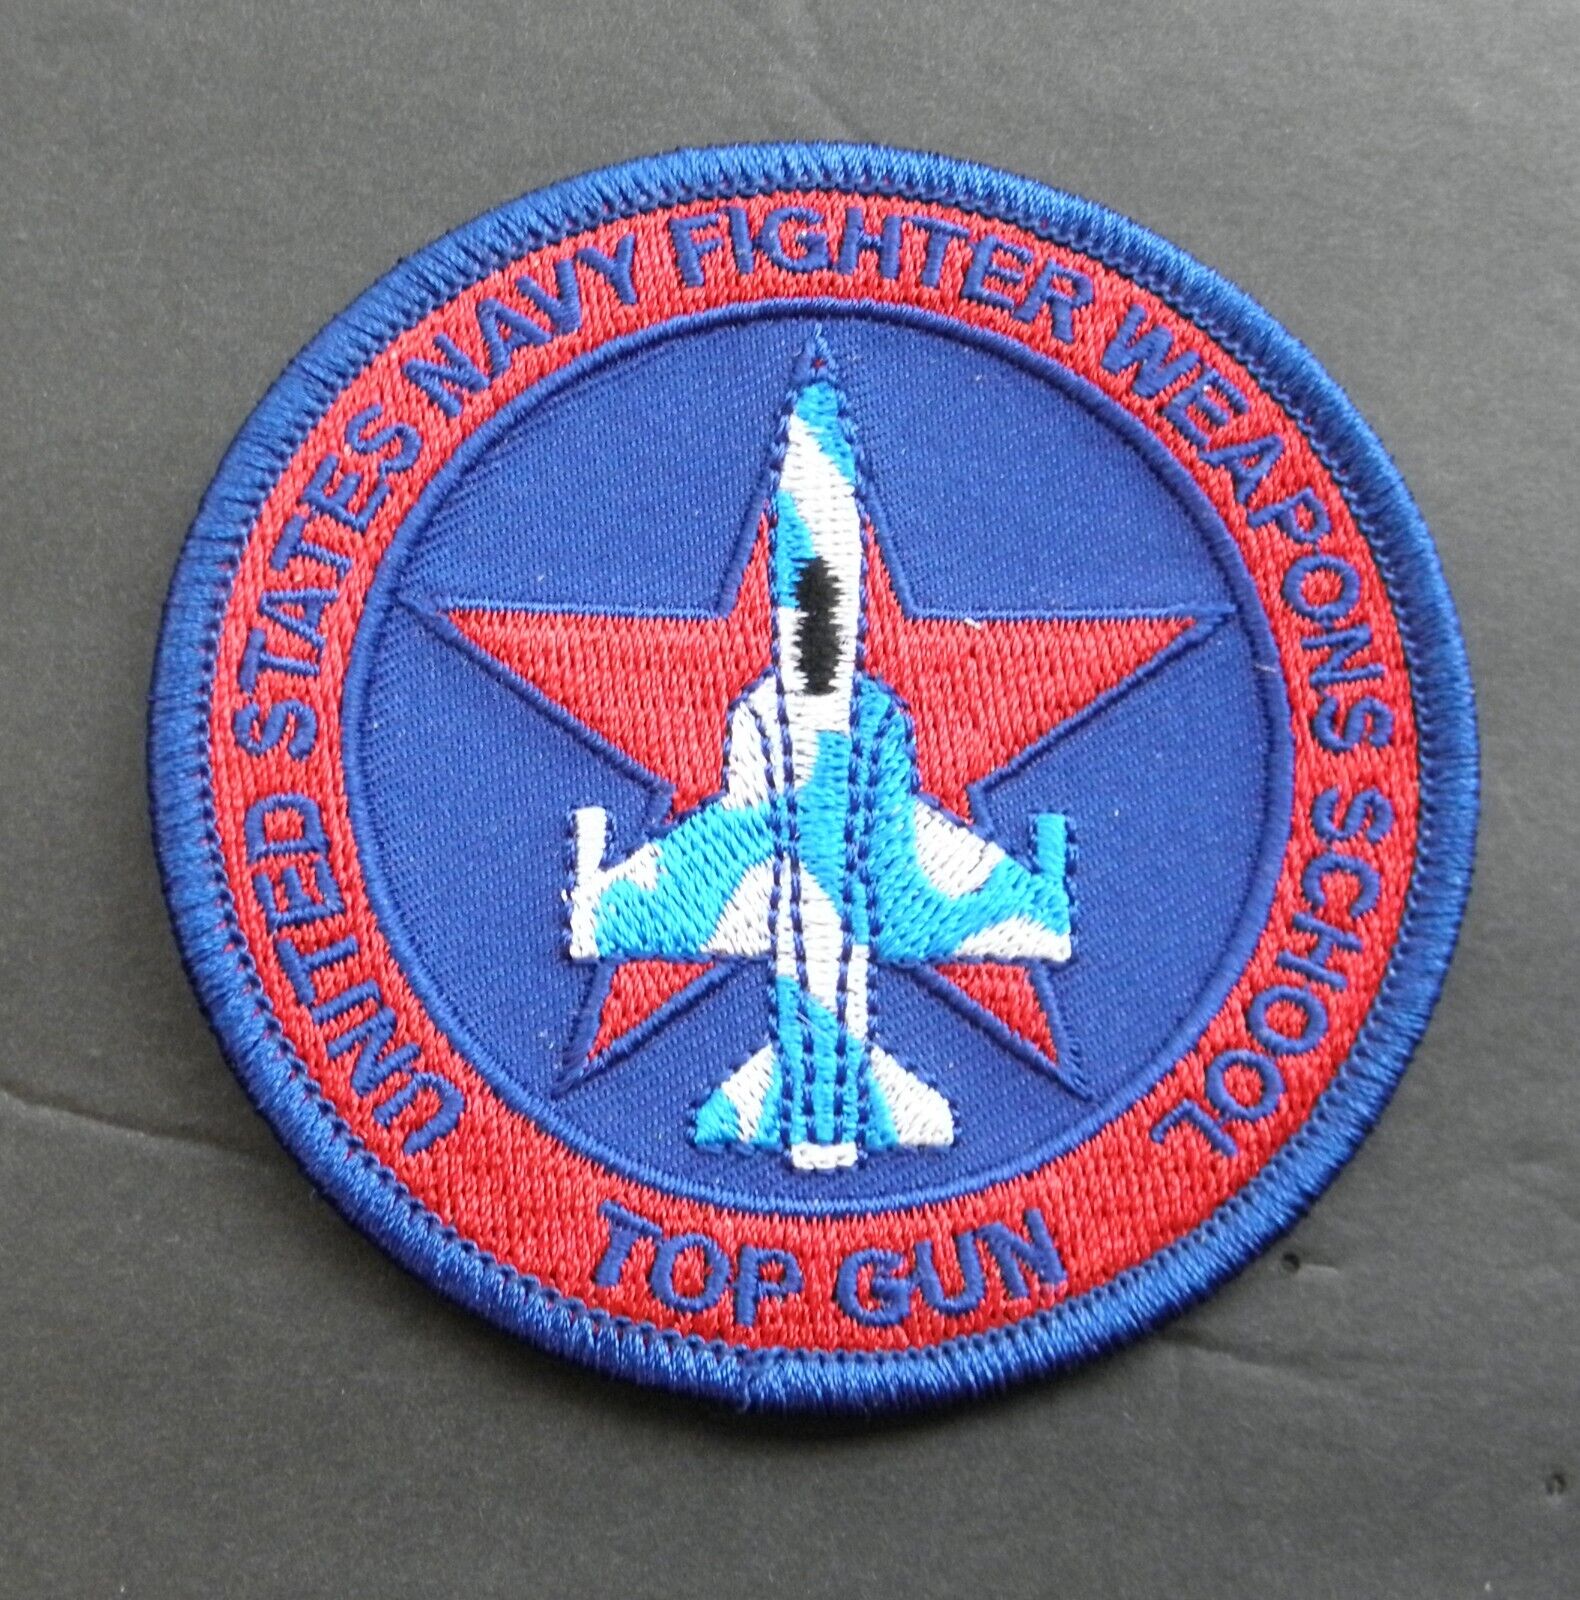 TOP GUN US NAVY WEAPONS SCHOOL EMBROIDERED PATCH 3.3 inches TOM CRUISE MAVERICK